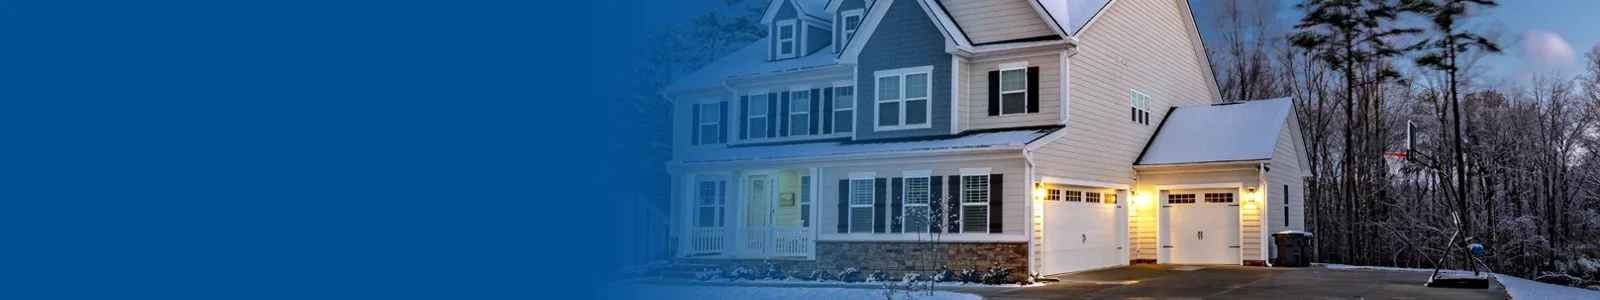 Melting Snow: The Potential Problems For Michigan Homeowners